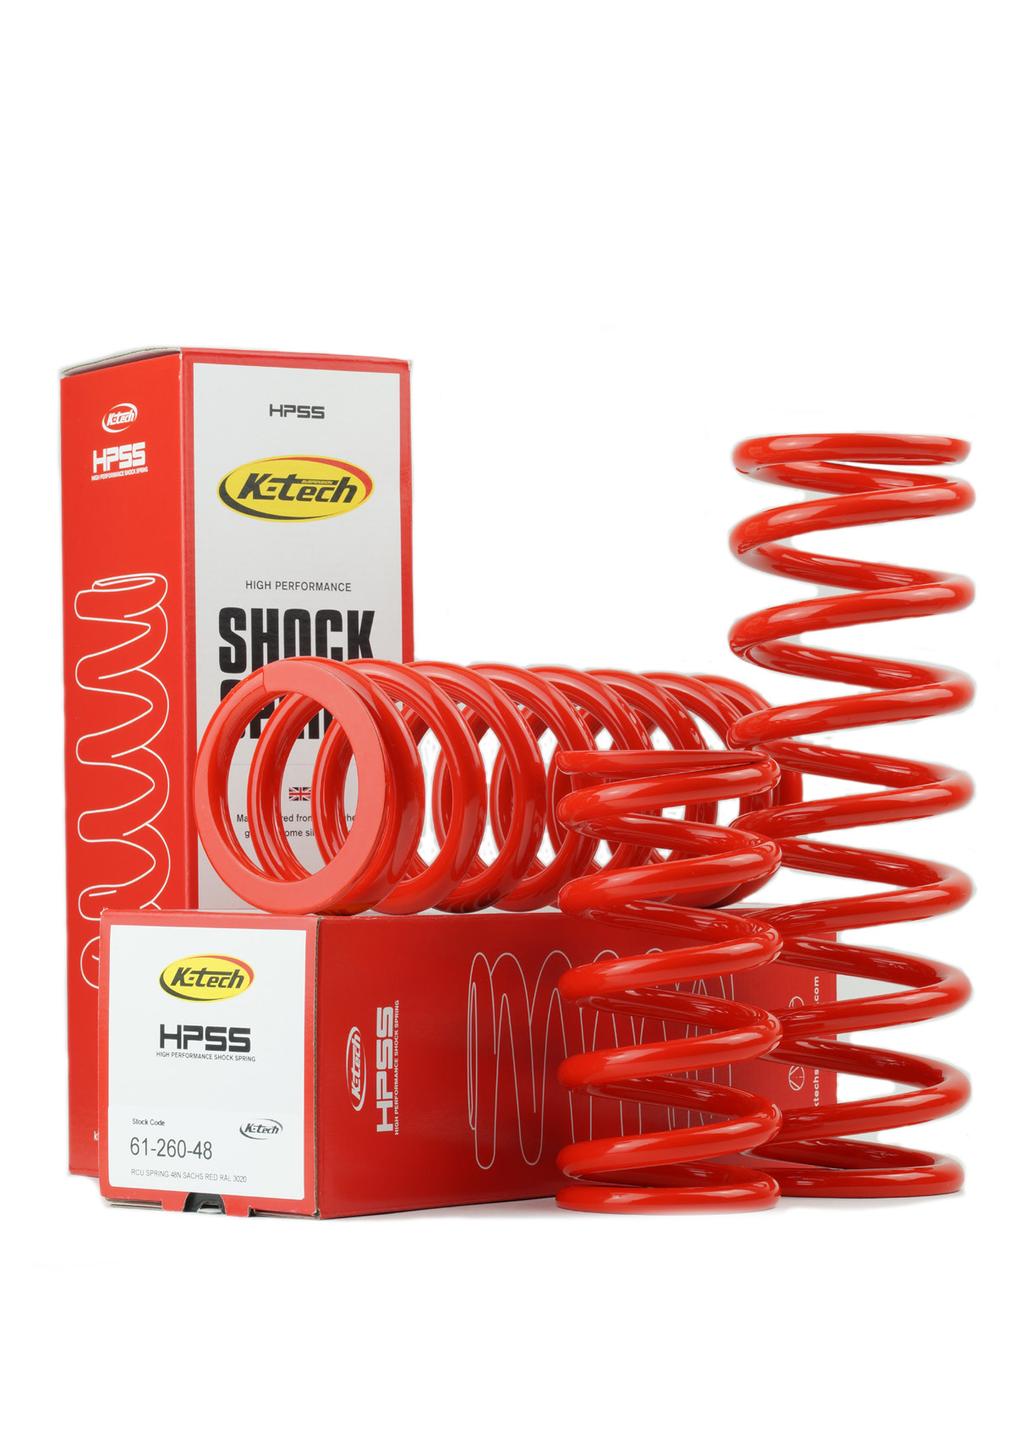 Specification K-Tech shock springs are manufactured from the highest grade chrome silicone wire. Each spring is cold-coiled, heat-treated, pre-set and ground to length.